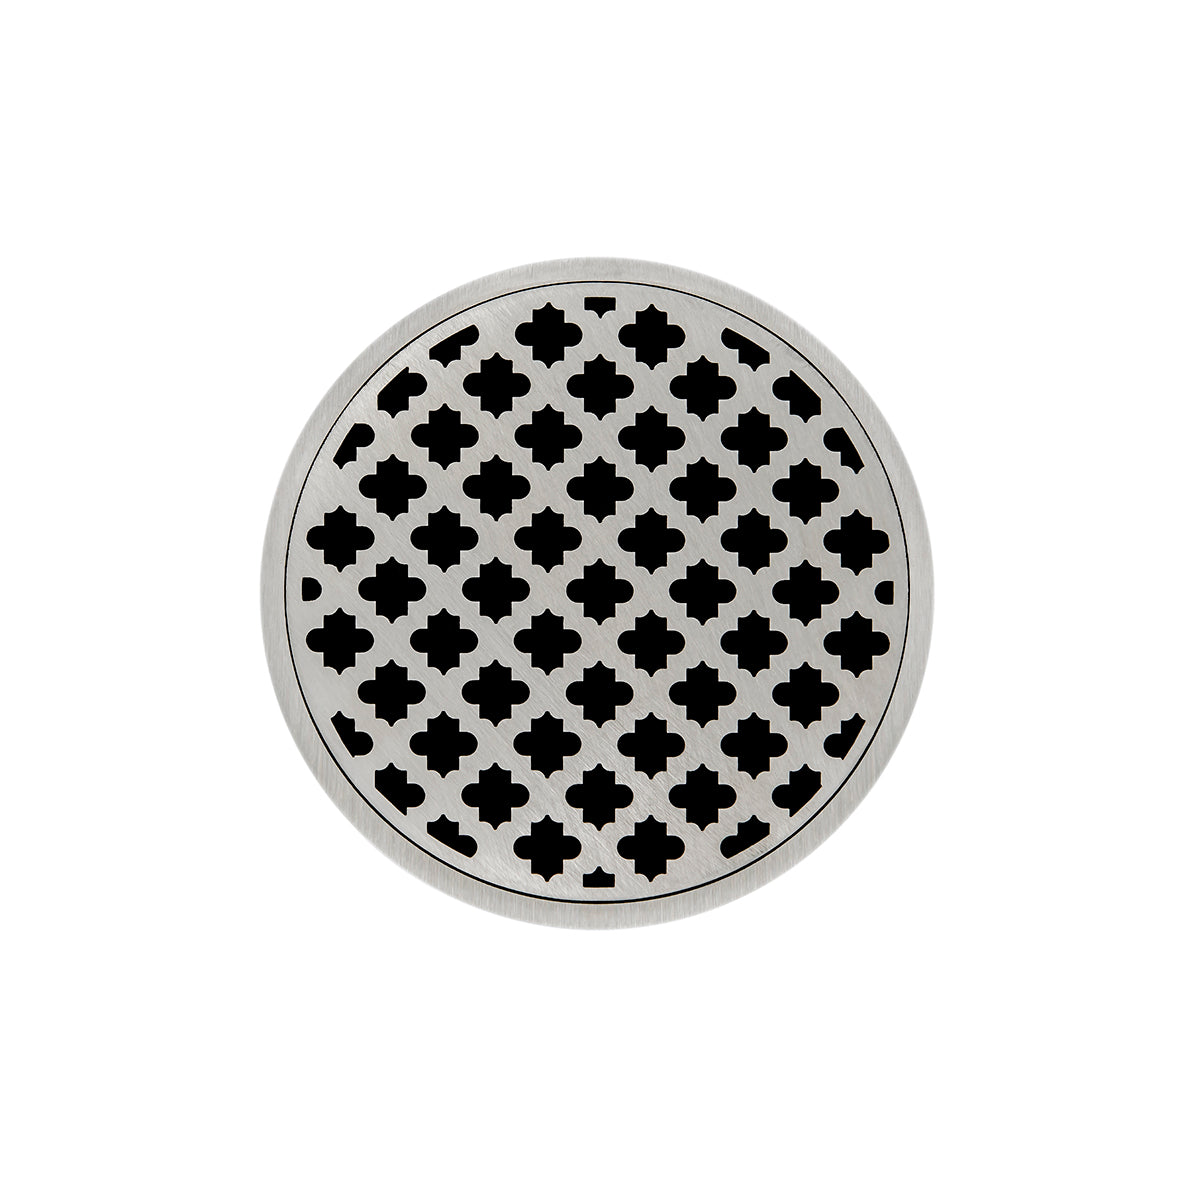 Infinity Drain 5" Round RMD 5 Premium Center Drain Kit with Moor Pattern Decorative Plate with Cast Iron Drain Body for Hot Mop, 2" Outlet